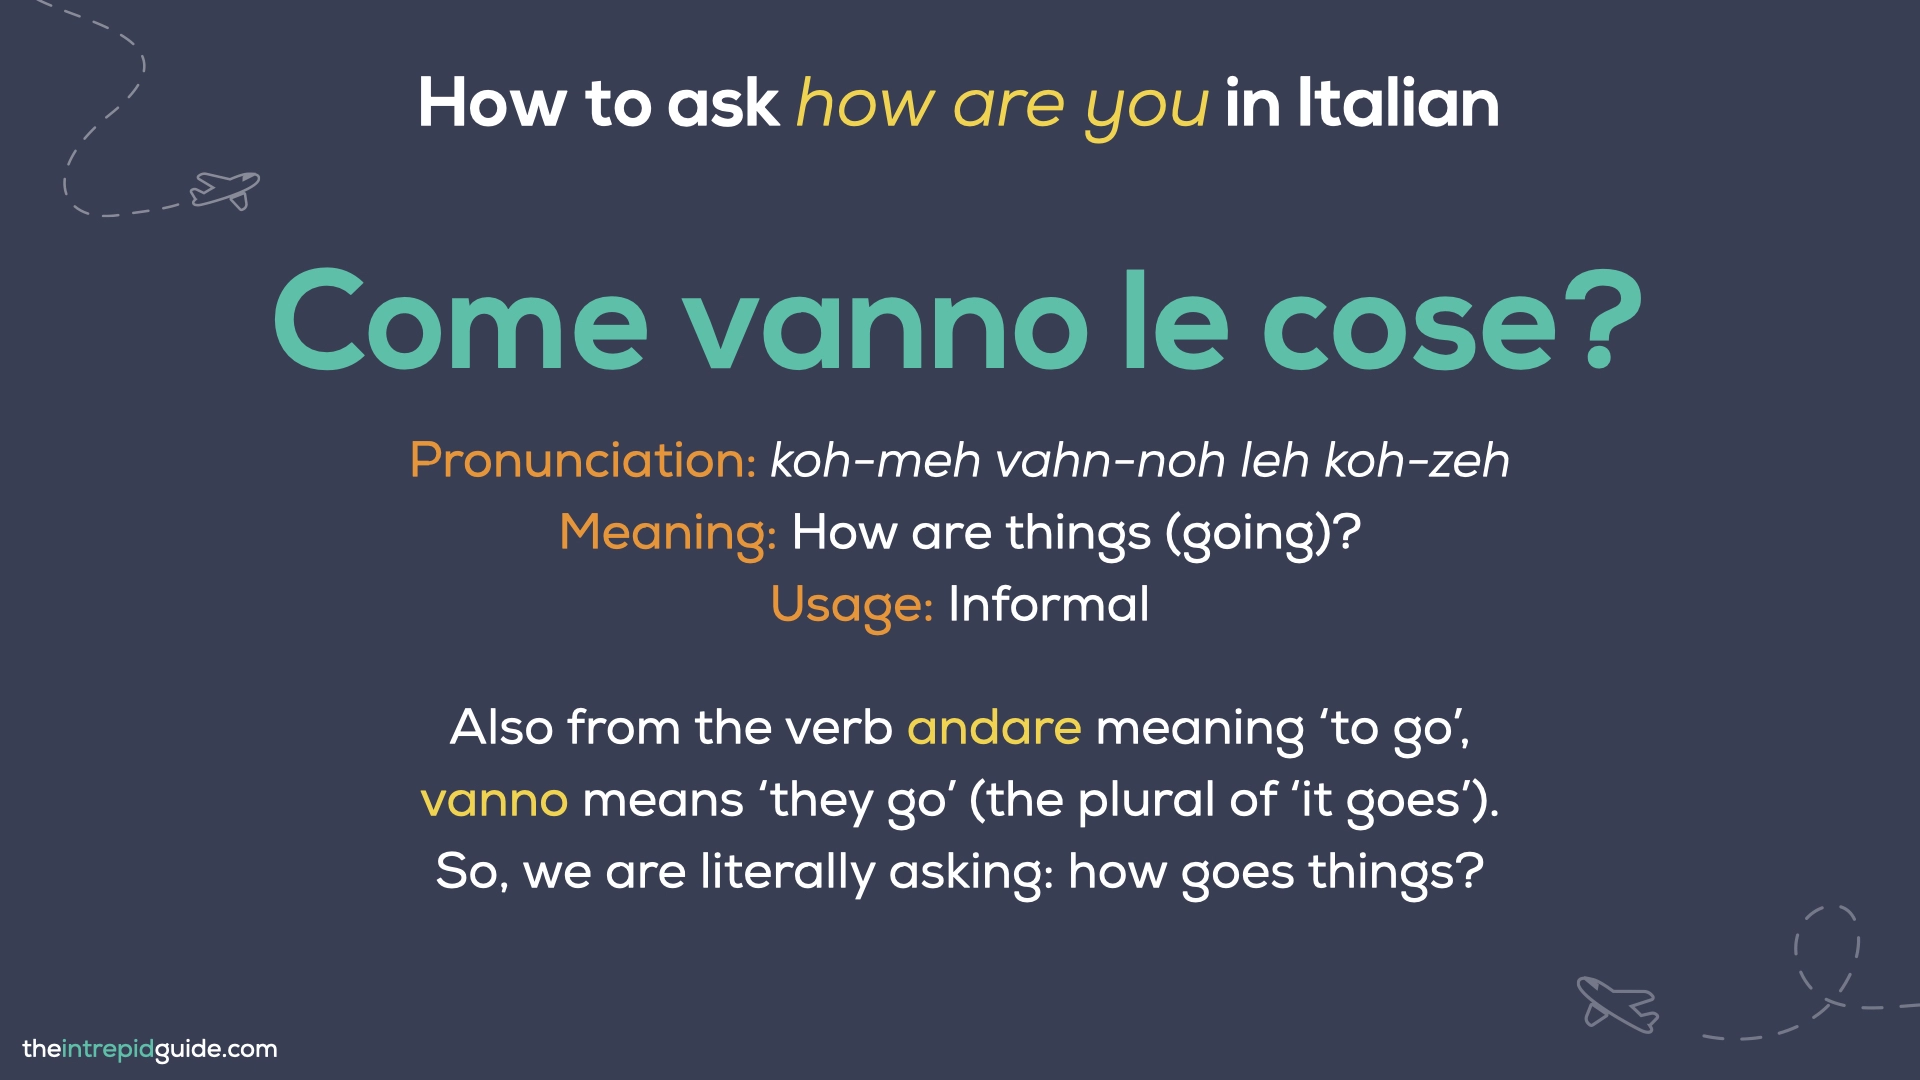 How to say How are you in Italian - Come vanno le cose